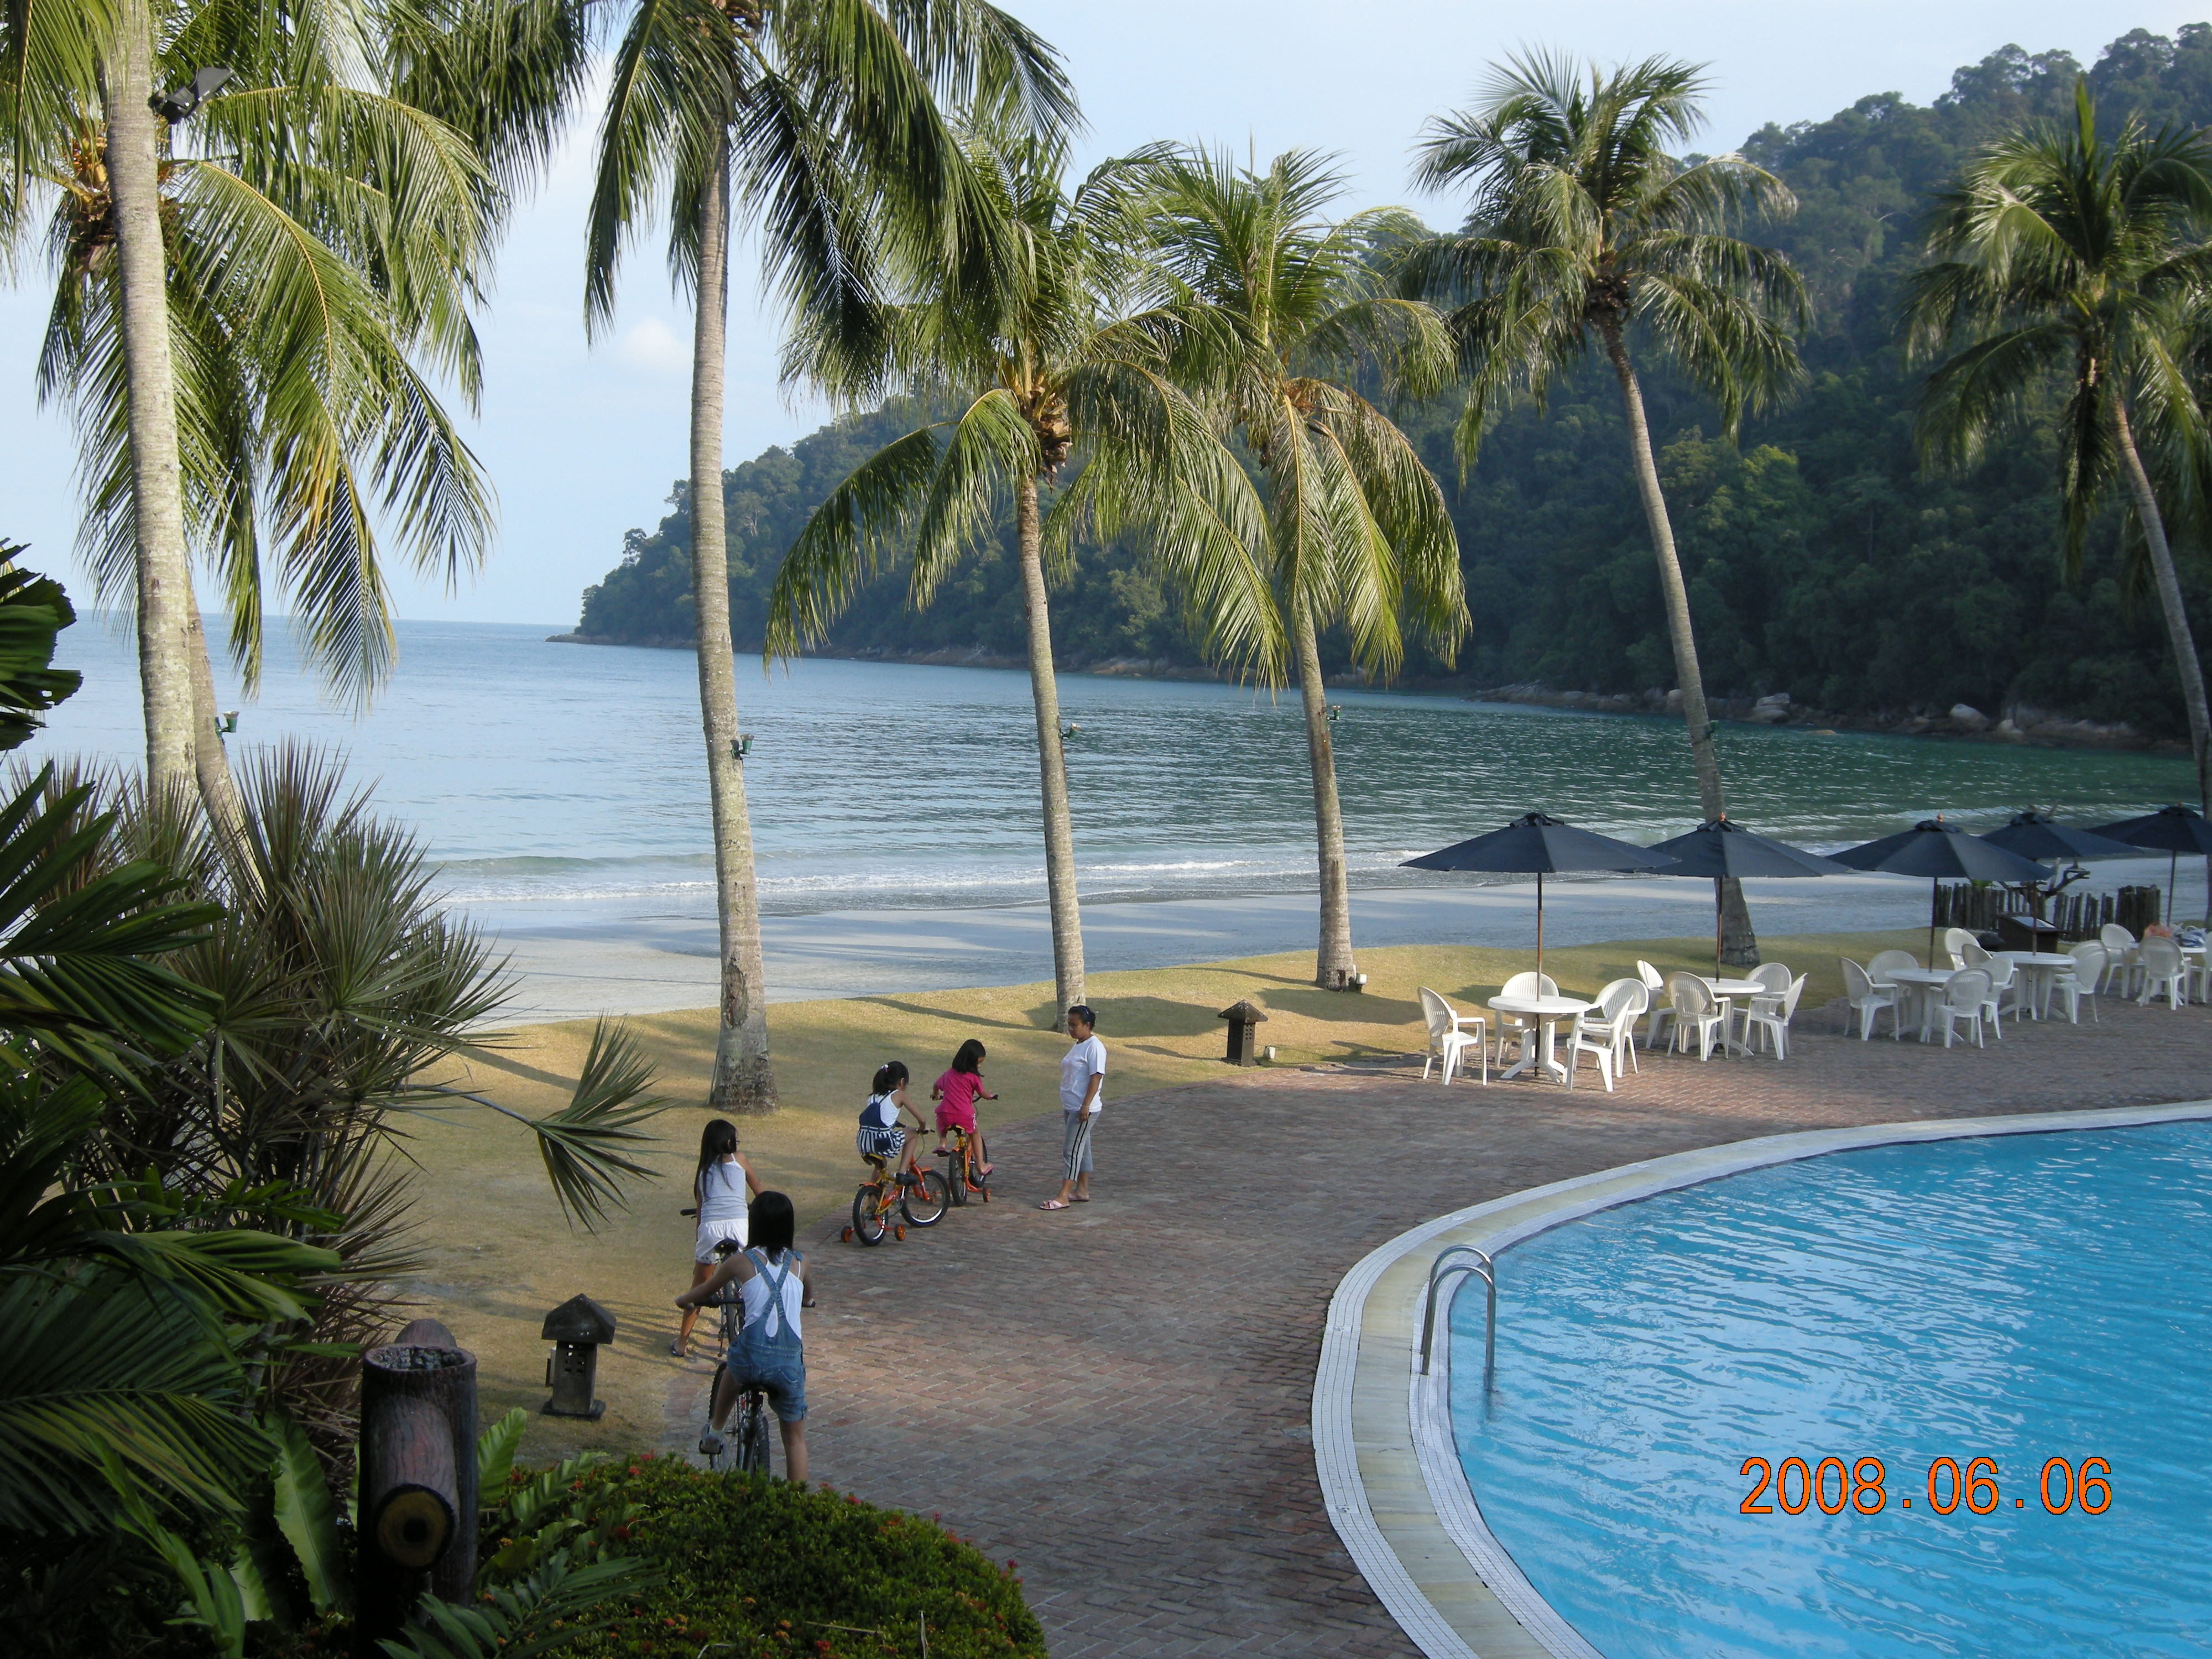 Download this Pulau Pangkor Ideal Beach Holiday For Folks The West Coast picture